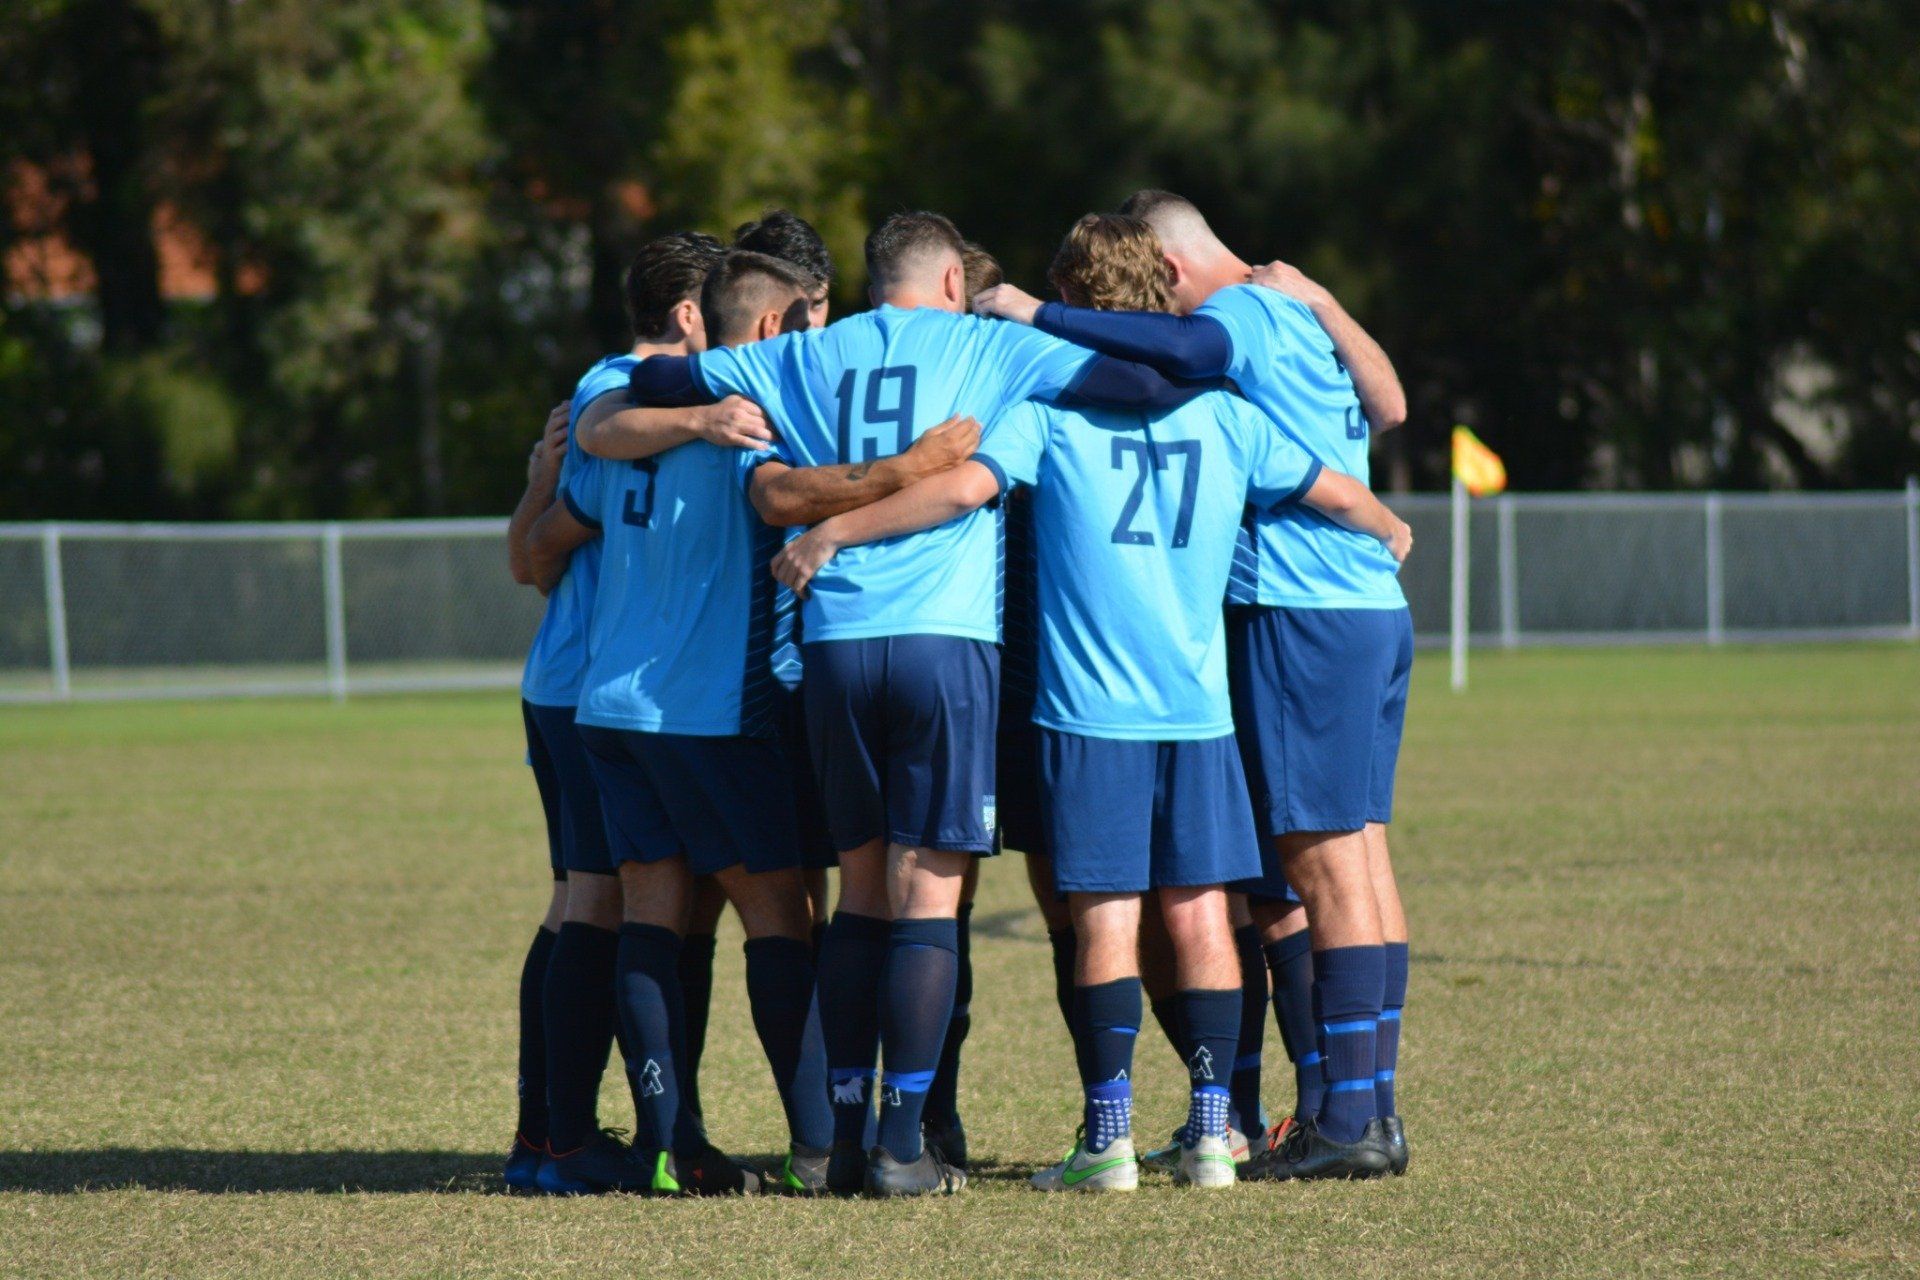 Tweed United soccer players in a huddle on the pitch